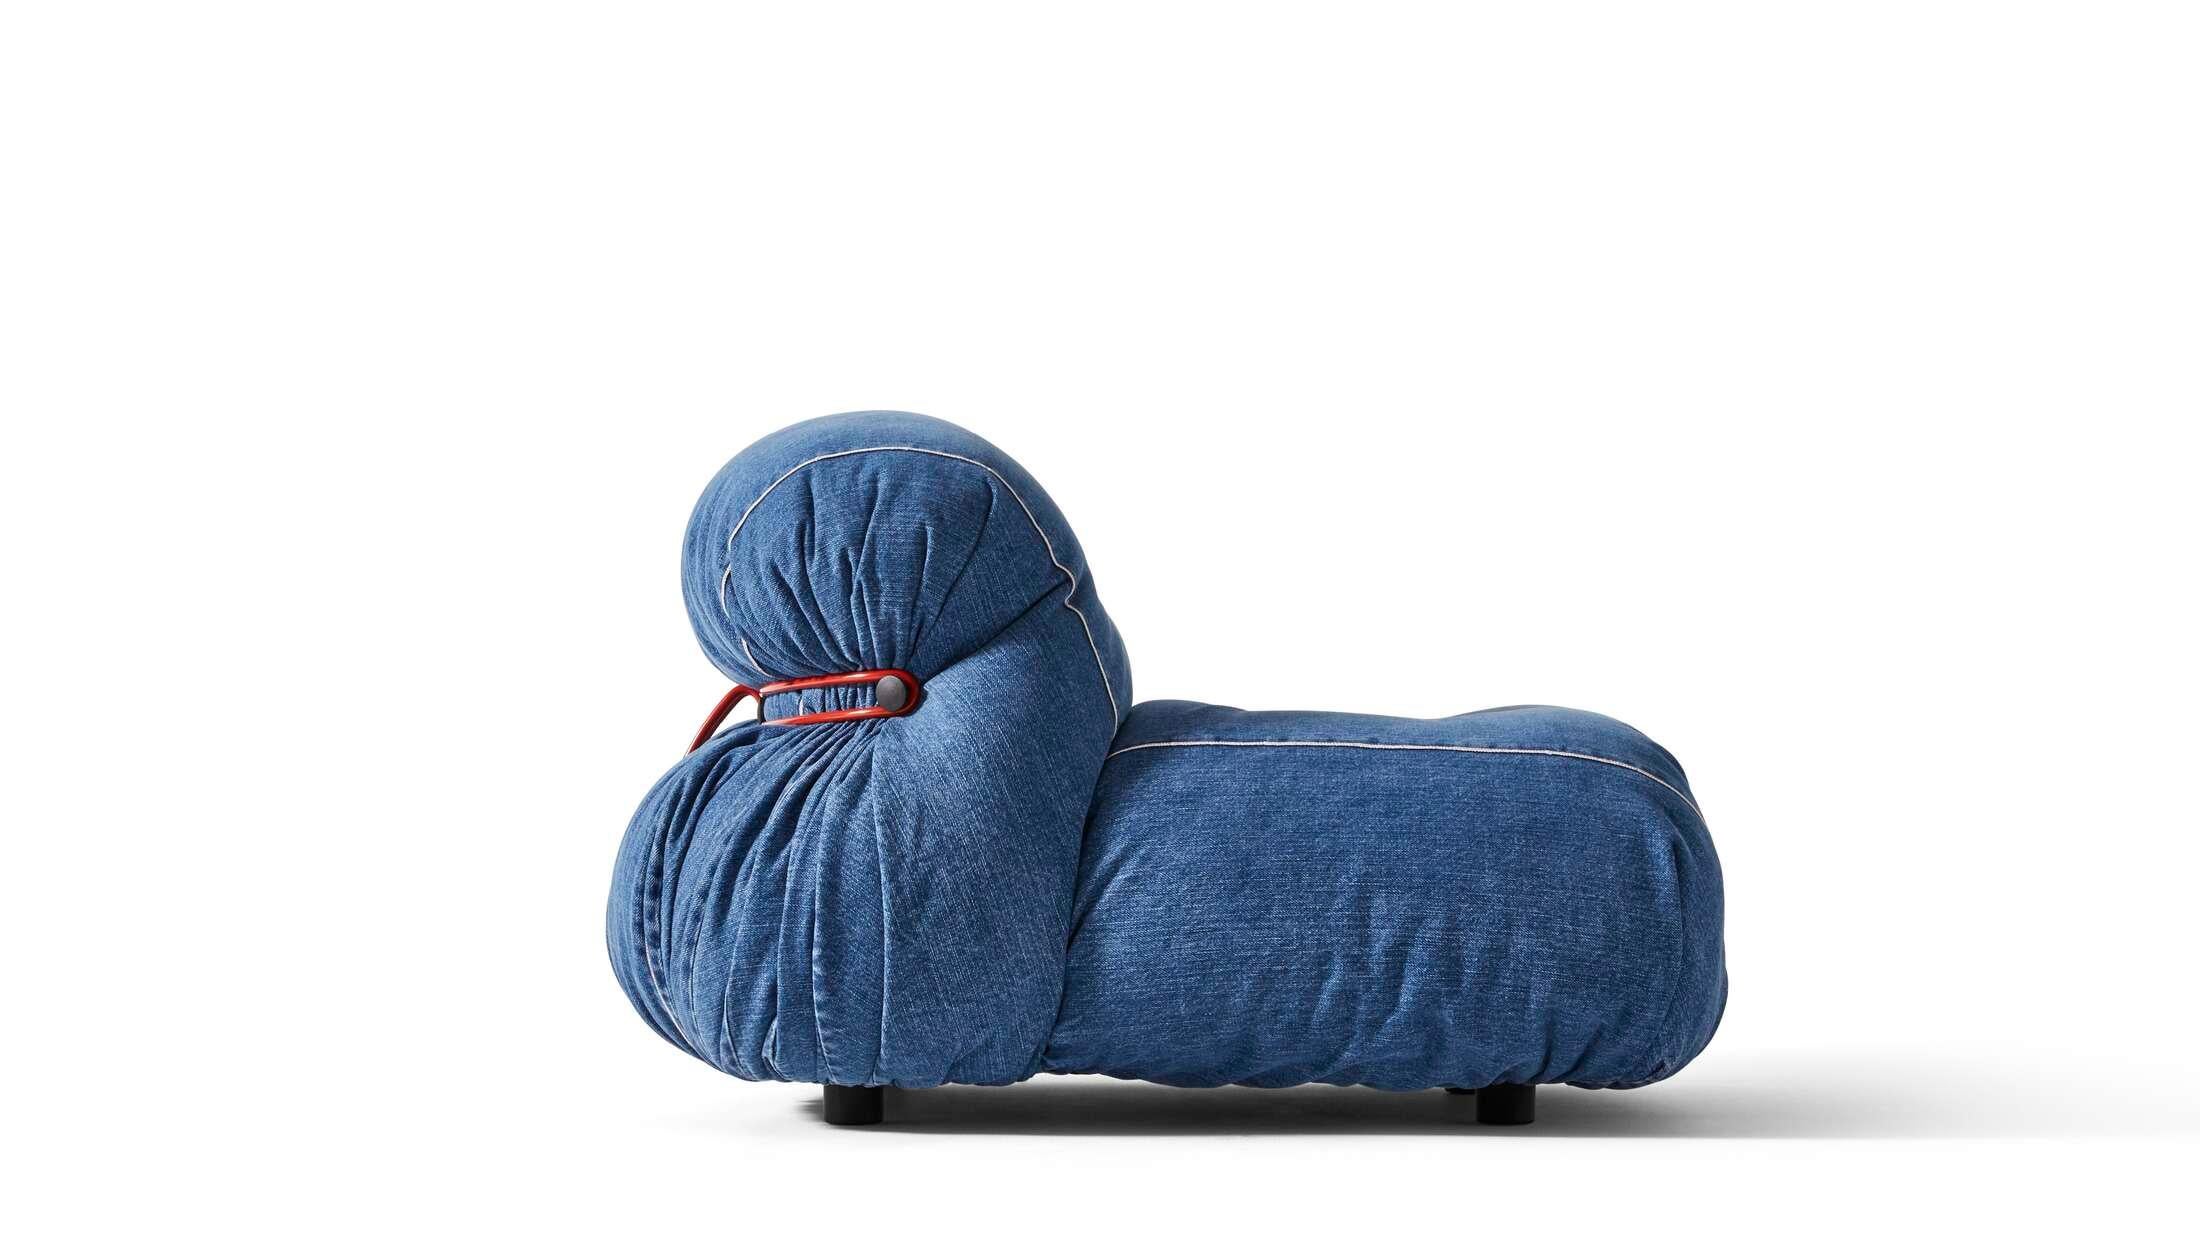 Contemporary Limited Edition Soriana Denim Armchair by Afra & Tobia for Cassina, Italy - new